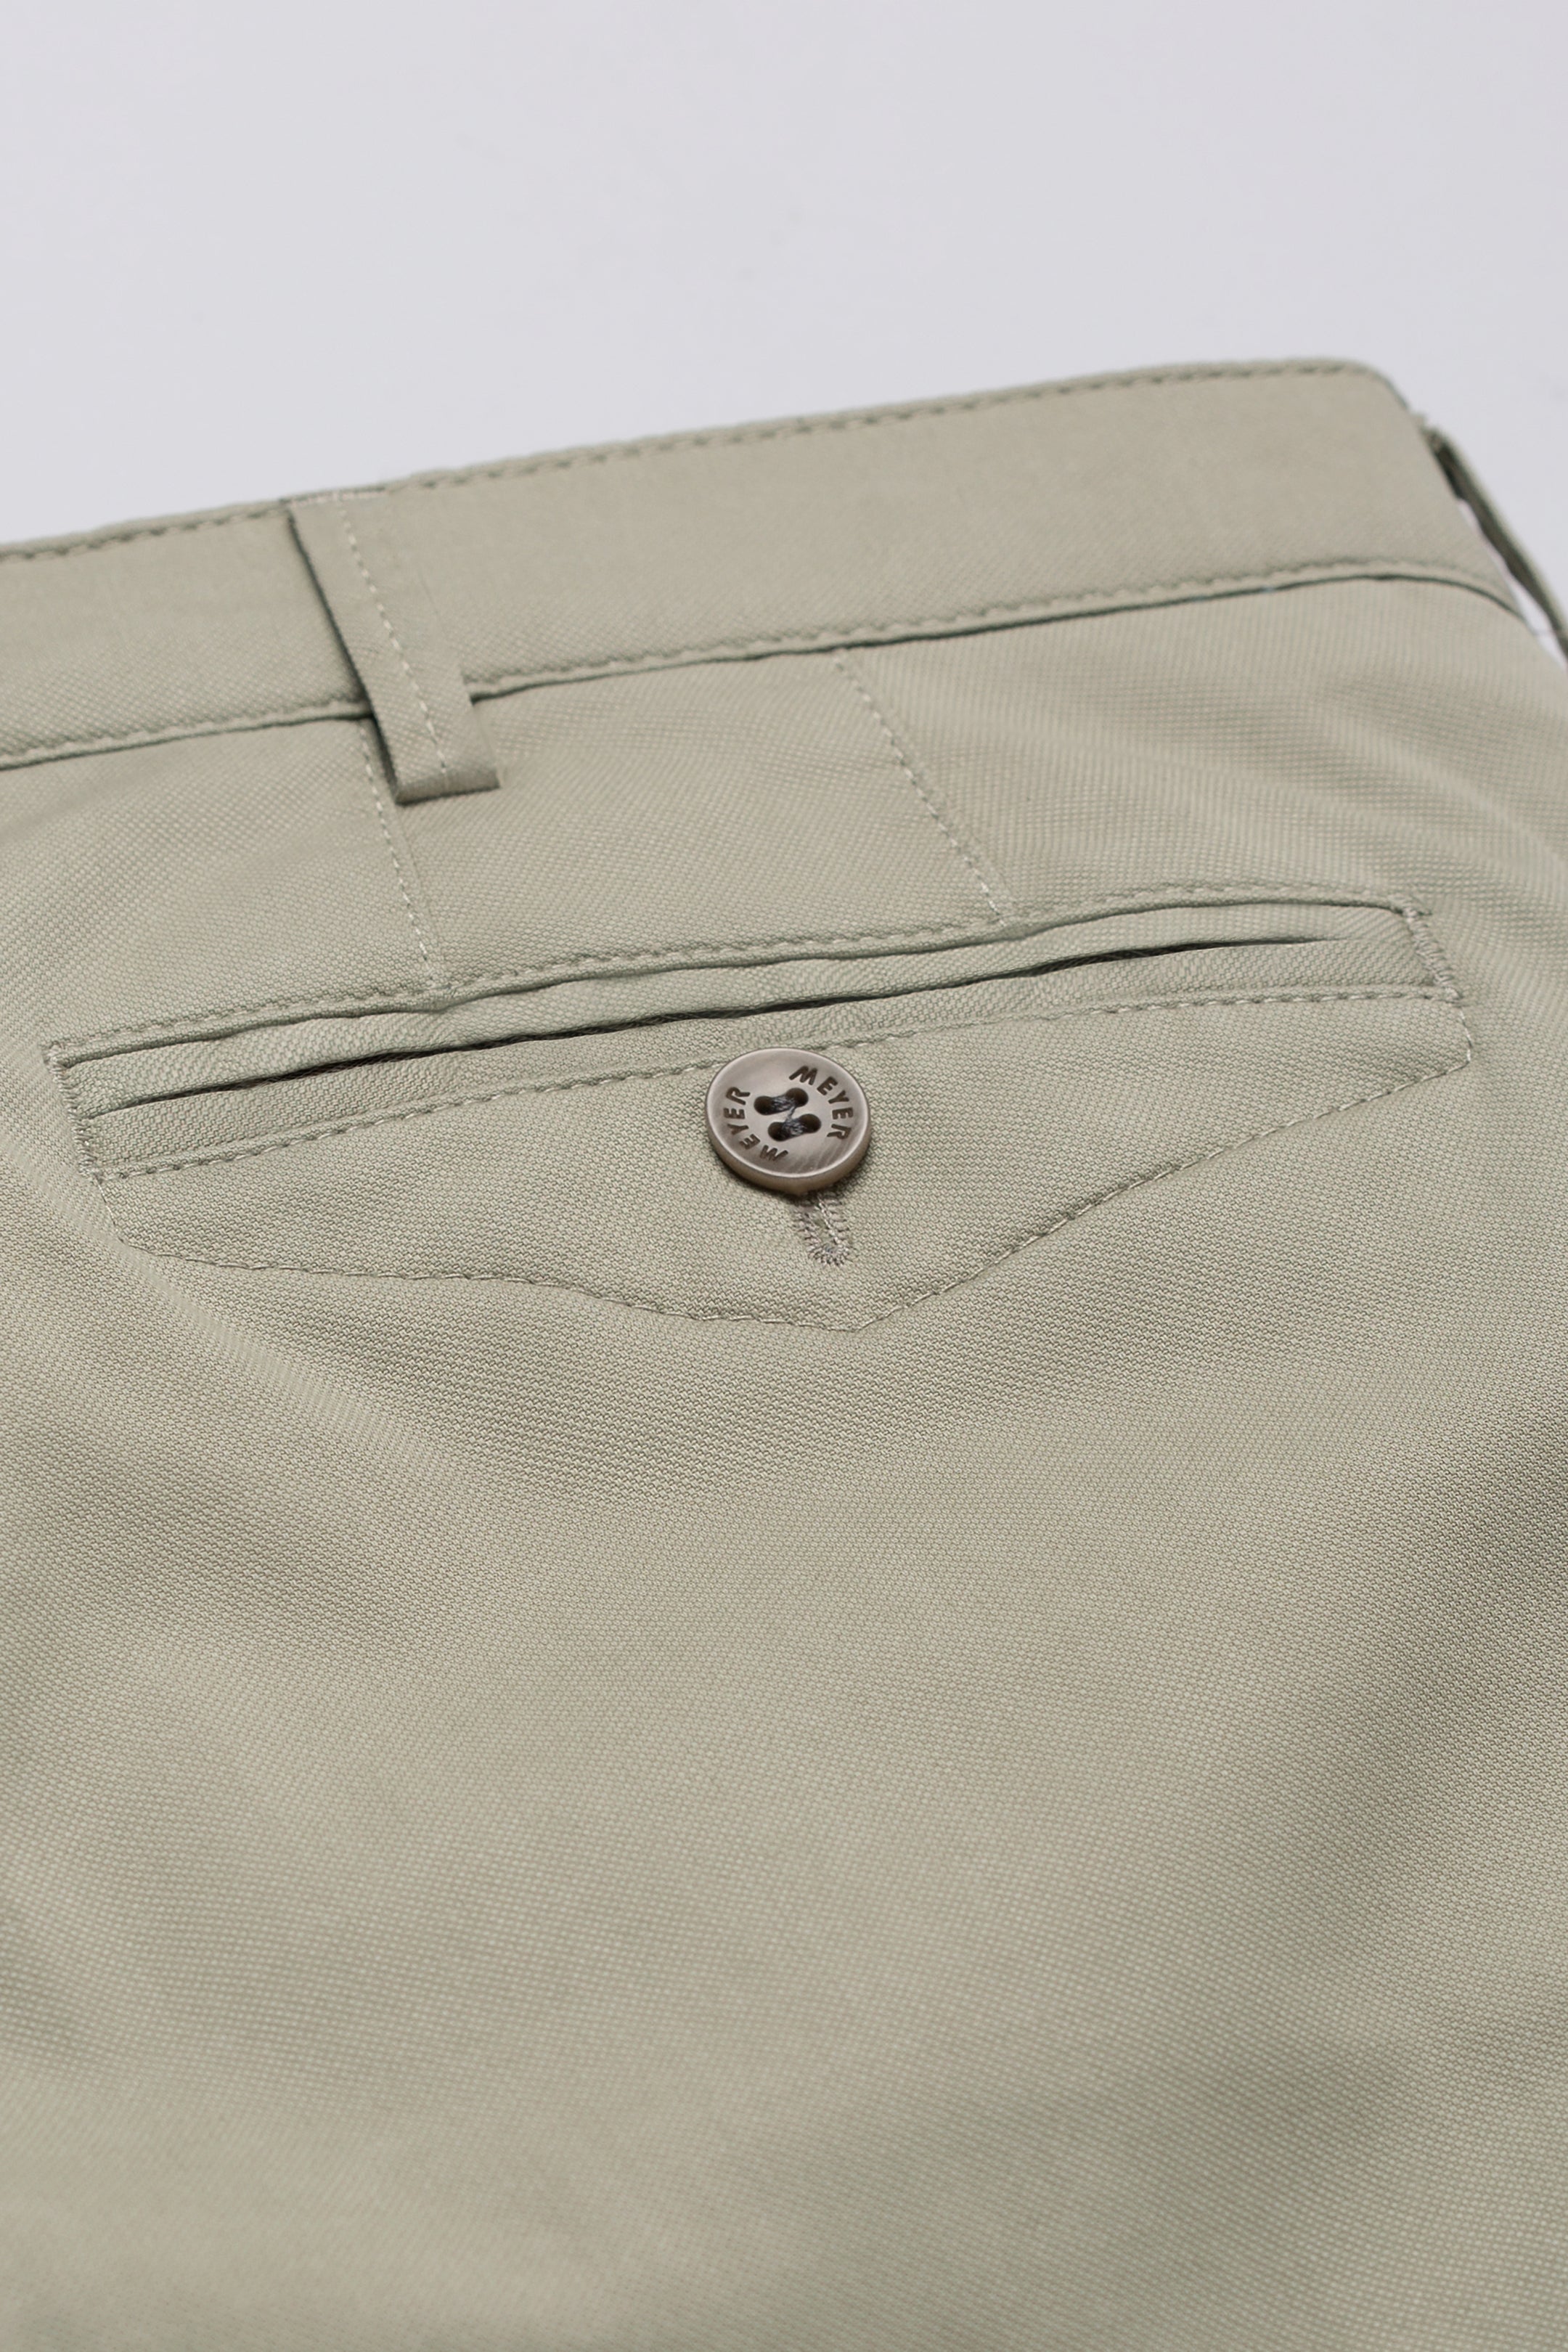 30% OFF - MEYER Chicago Trousers - 5060 Lightweight Cotton Chino - Sage - Sizes: 34 & 38 SHORT